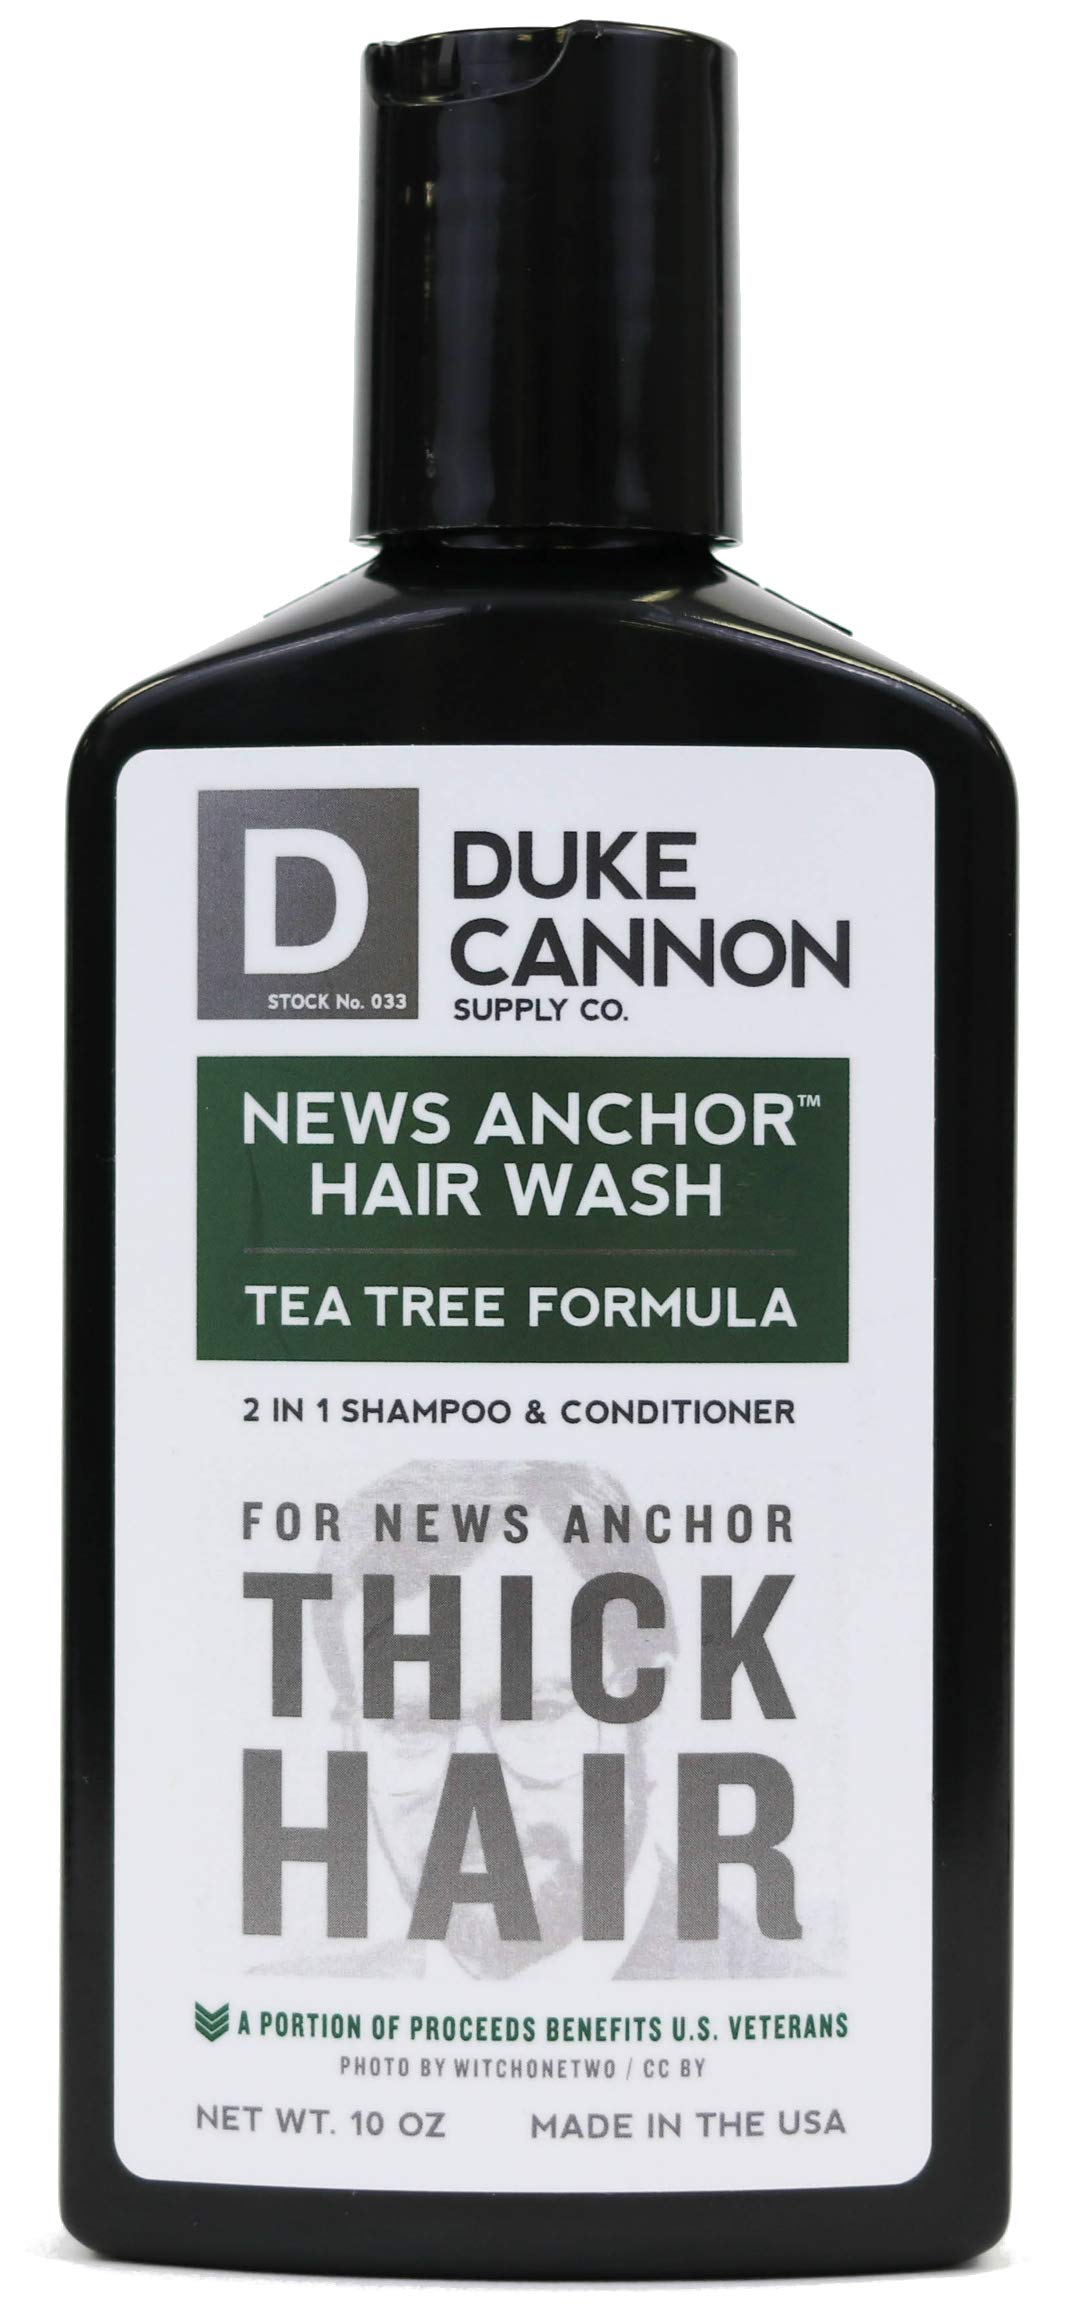 ''Duke Cannon News Anchor Hair Wash 2-in-1 SHAMPOO and Conditioner for Men - Tea Tree, 10 oz''